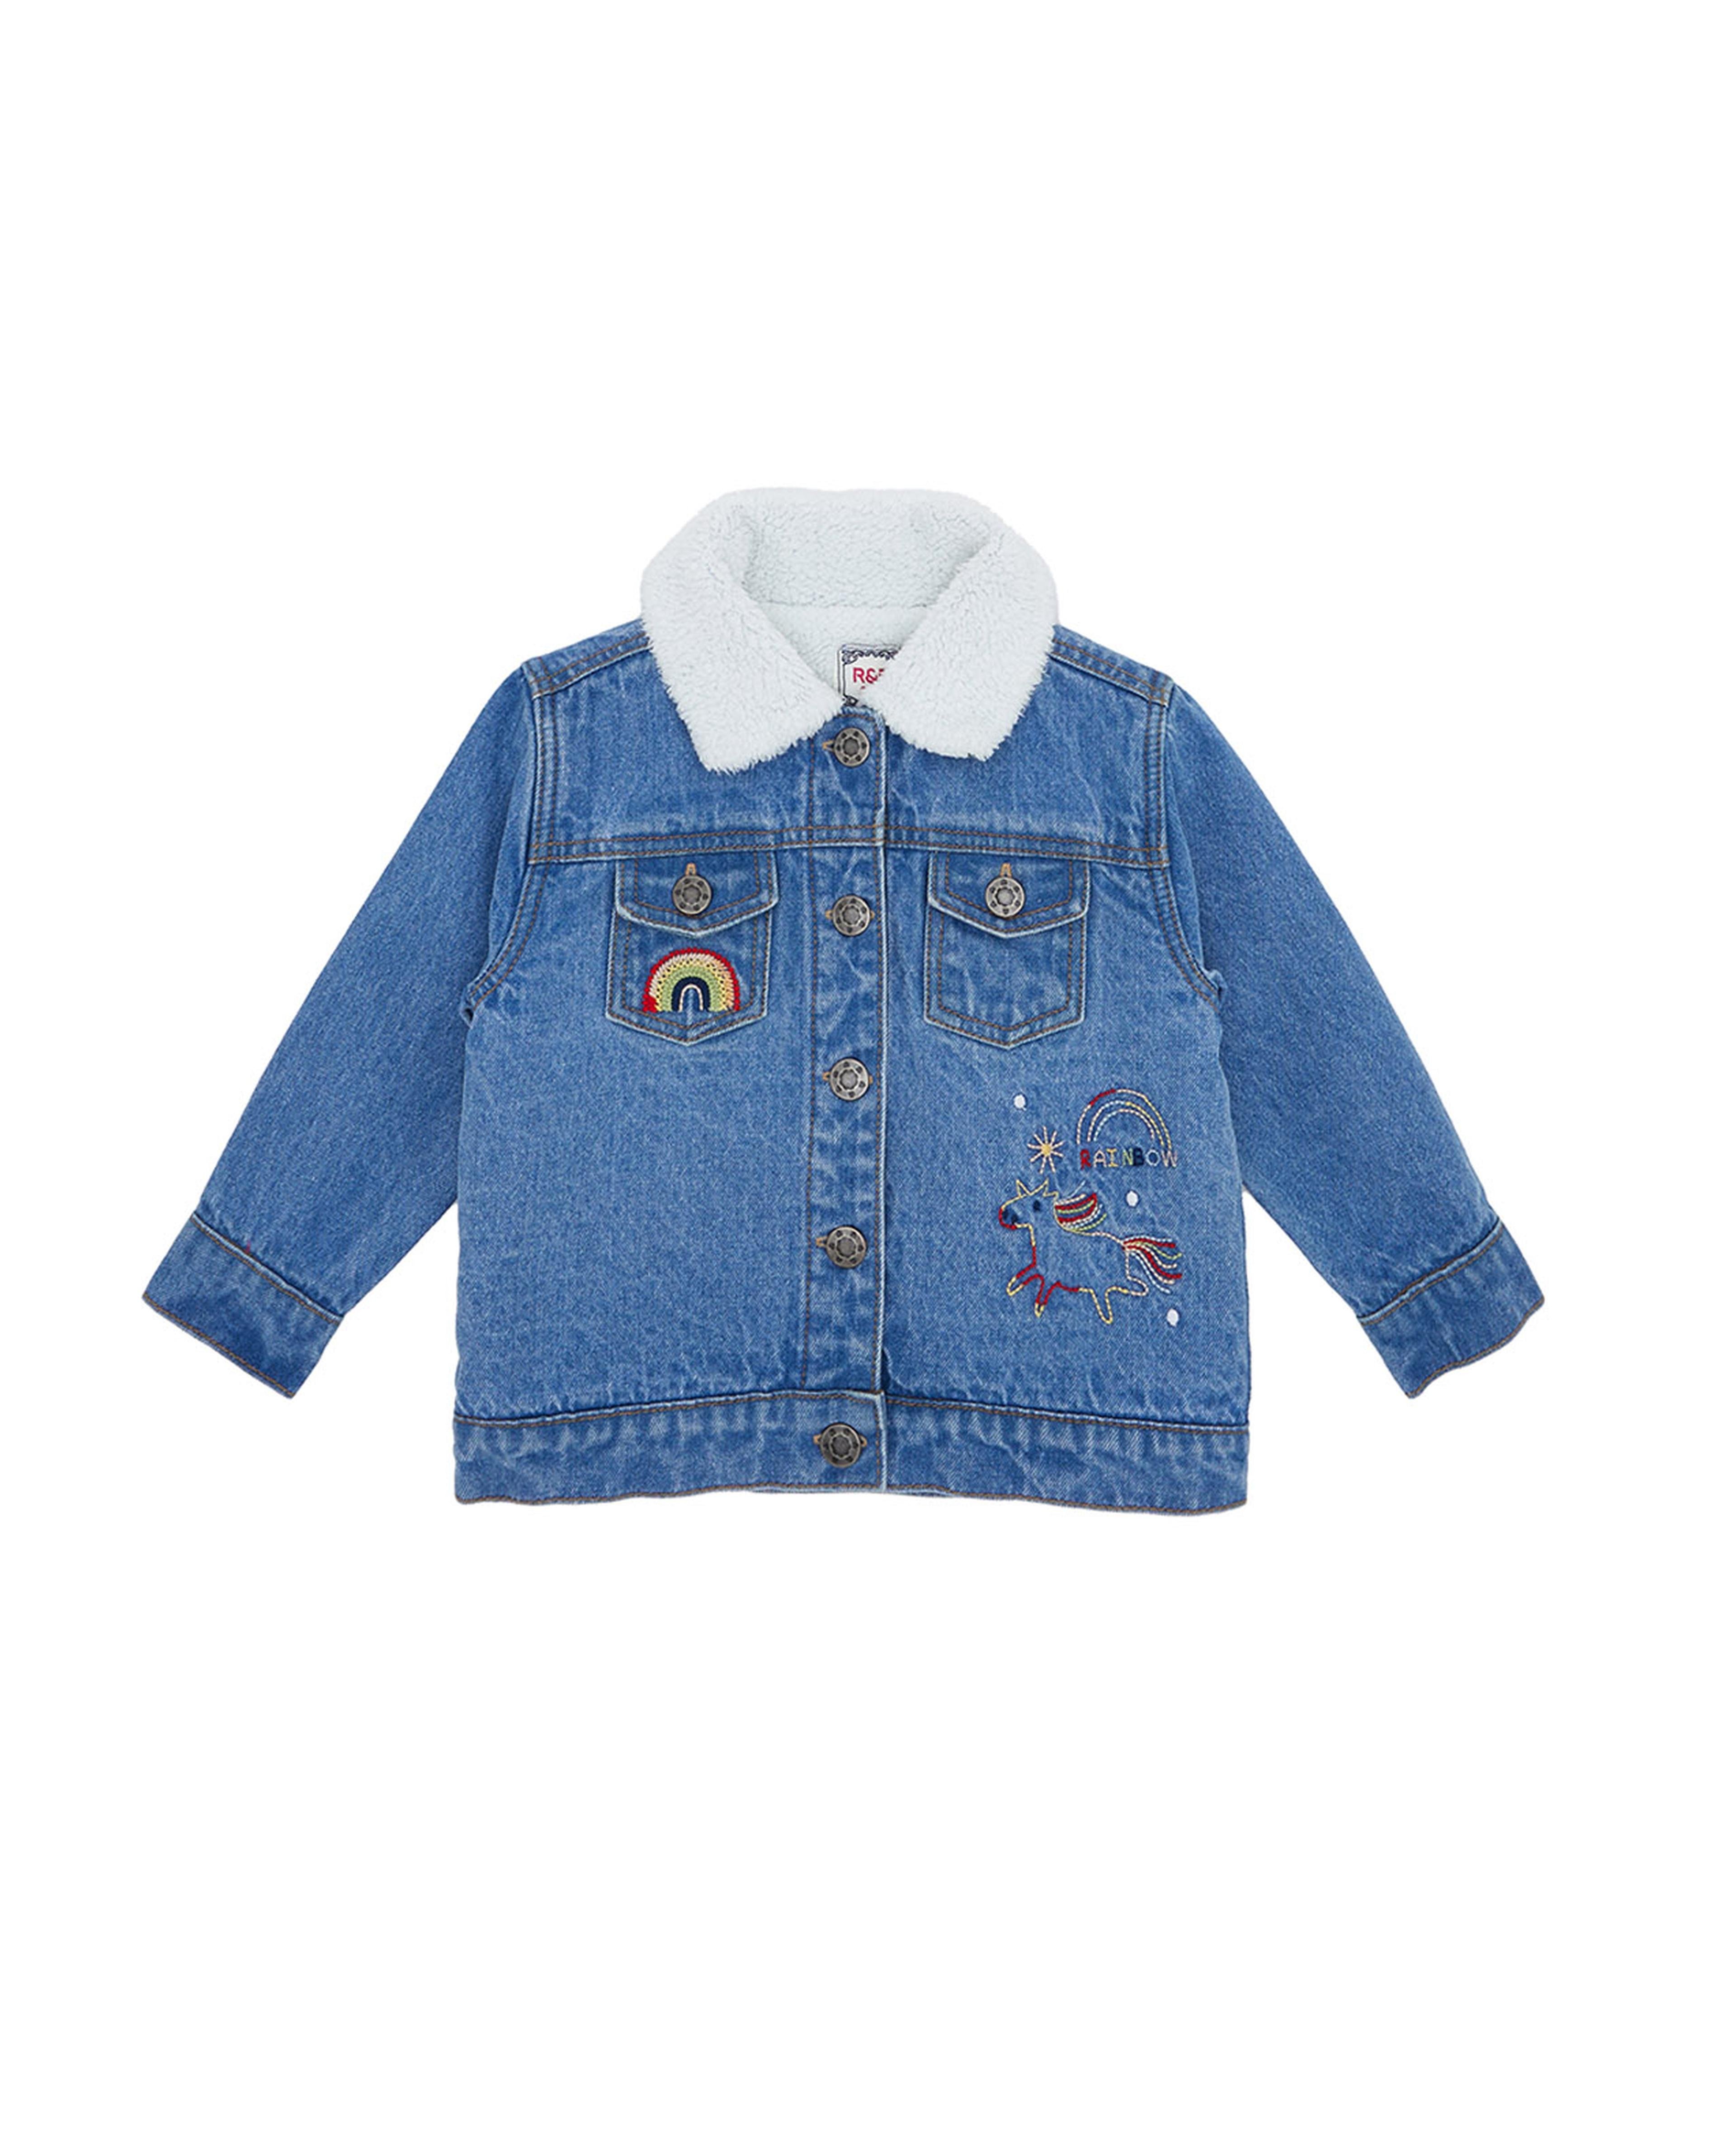 Embroidered Denim Jacket with Long Sleeves